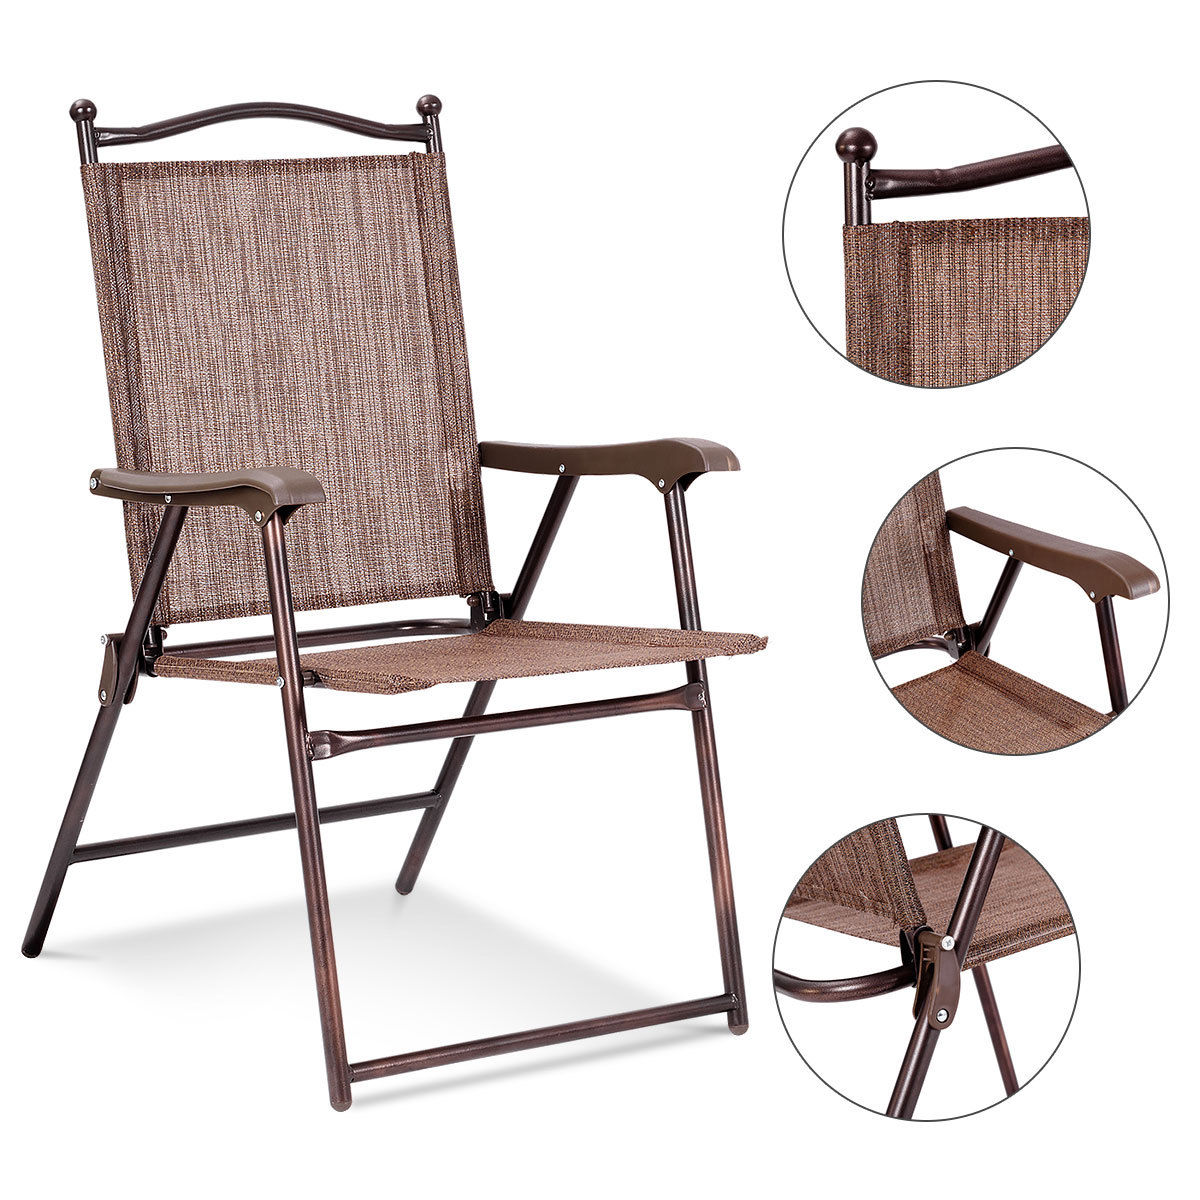 Costway Set of 2 Patio Folding Sling Back Chairs Camping Deck Garden Beach Brown - image 5 of 9